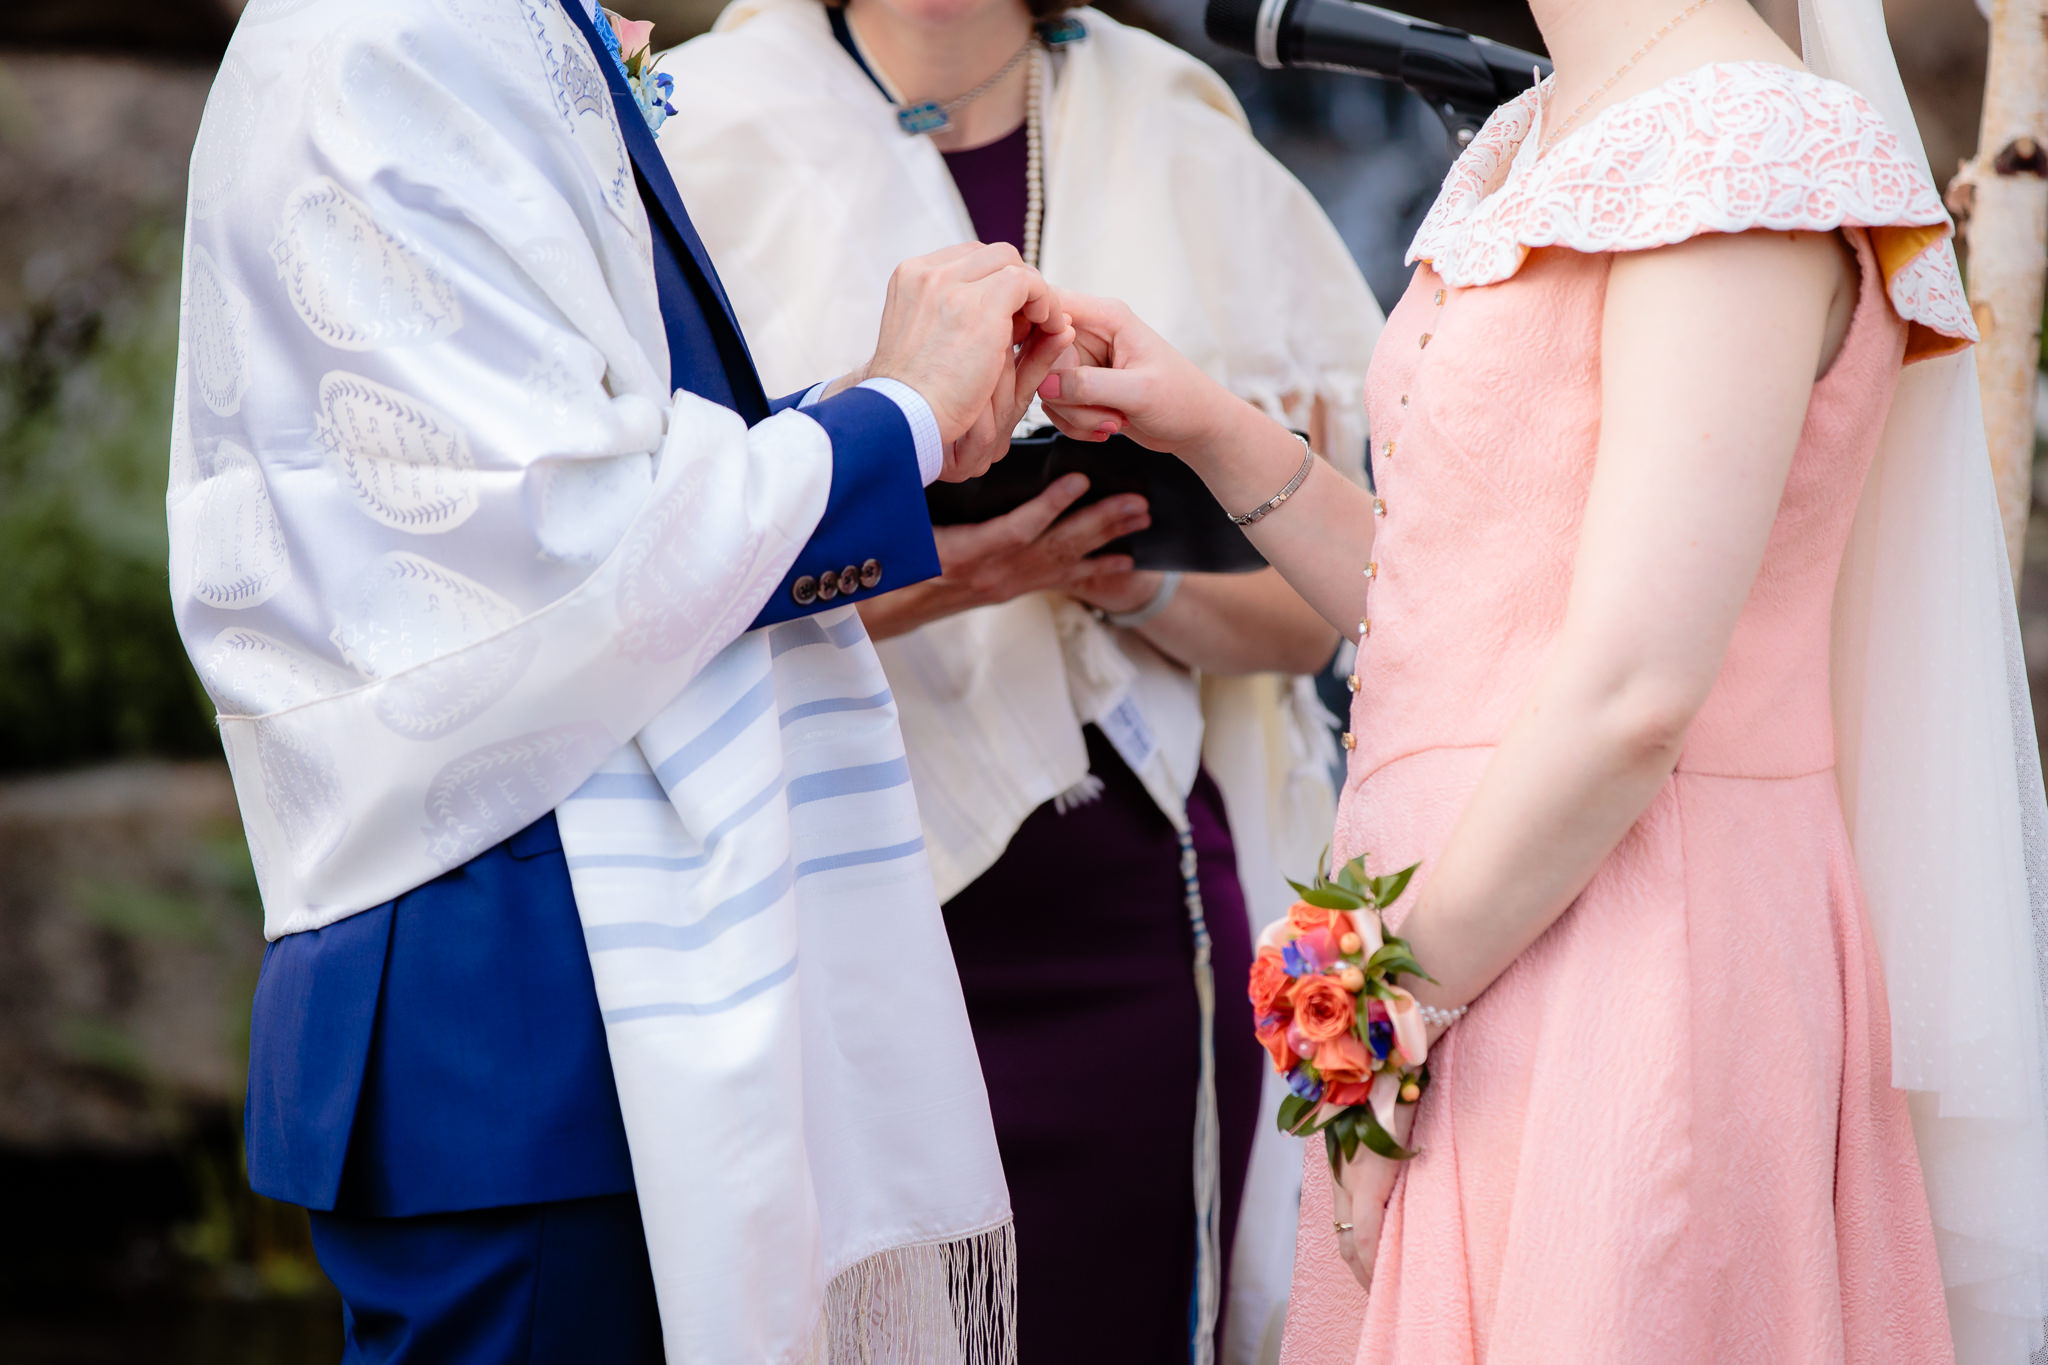 Groom places a ring on the bride's finger during a Phipps Conservatory Jewish wedding